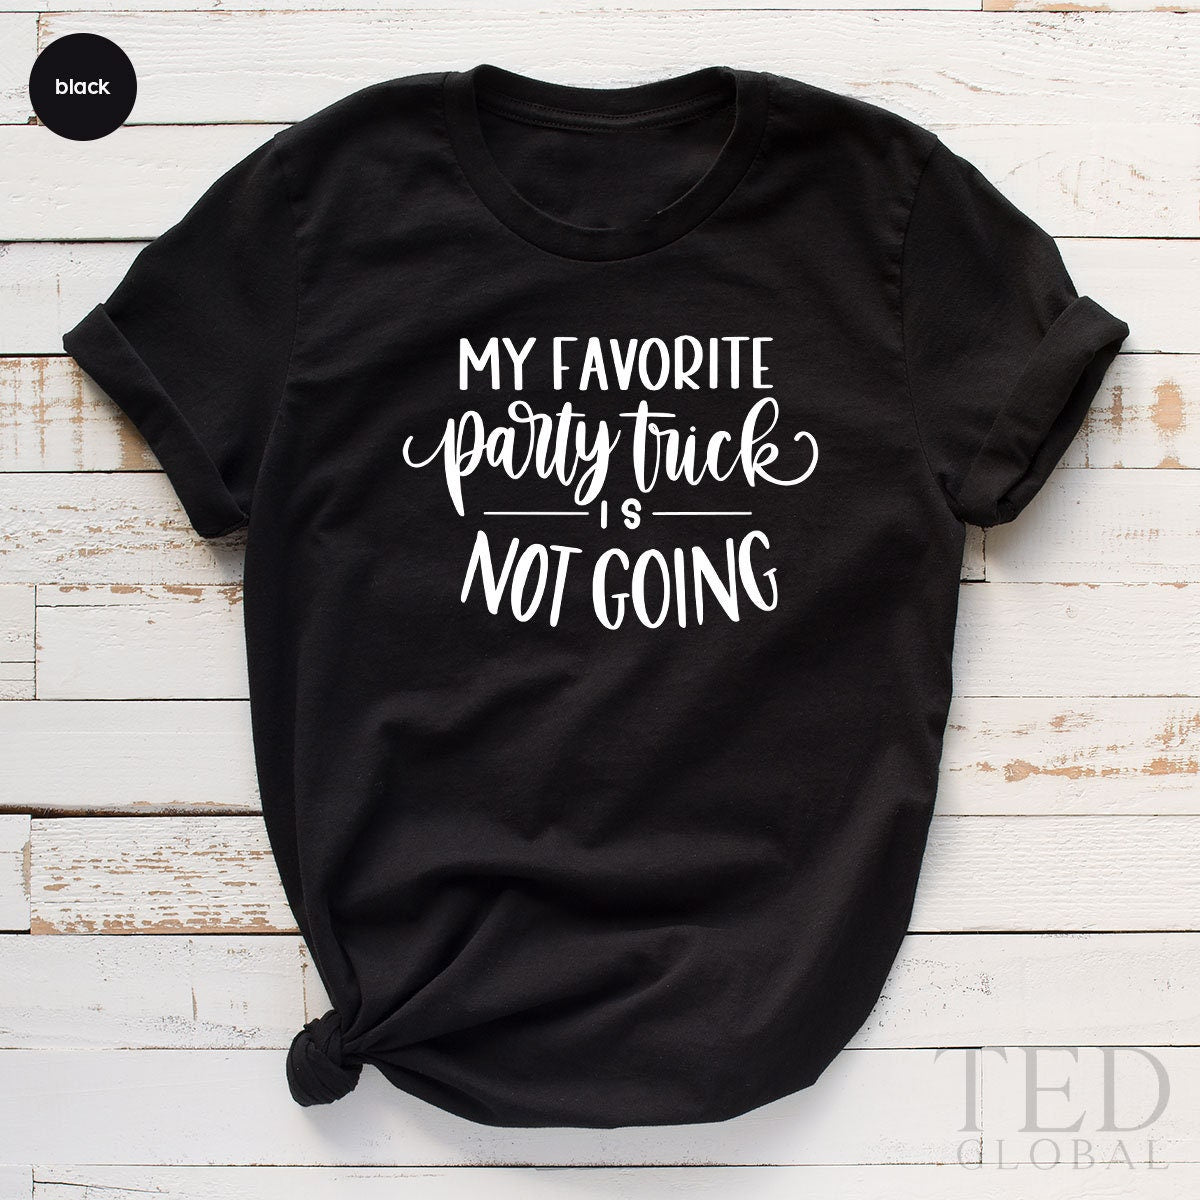 Funny Party Shirts, Sarcastic TShirt, Slogan T Shirt, Attitude Shirt, Party Humor Tee, My Favorite Party Trick Is Not Going Shirt - Fastdeliverytees.com